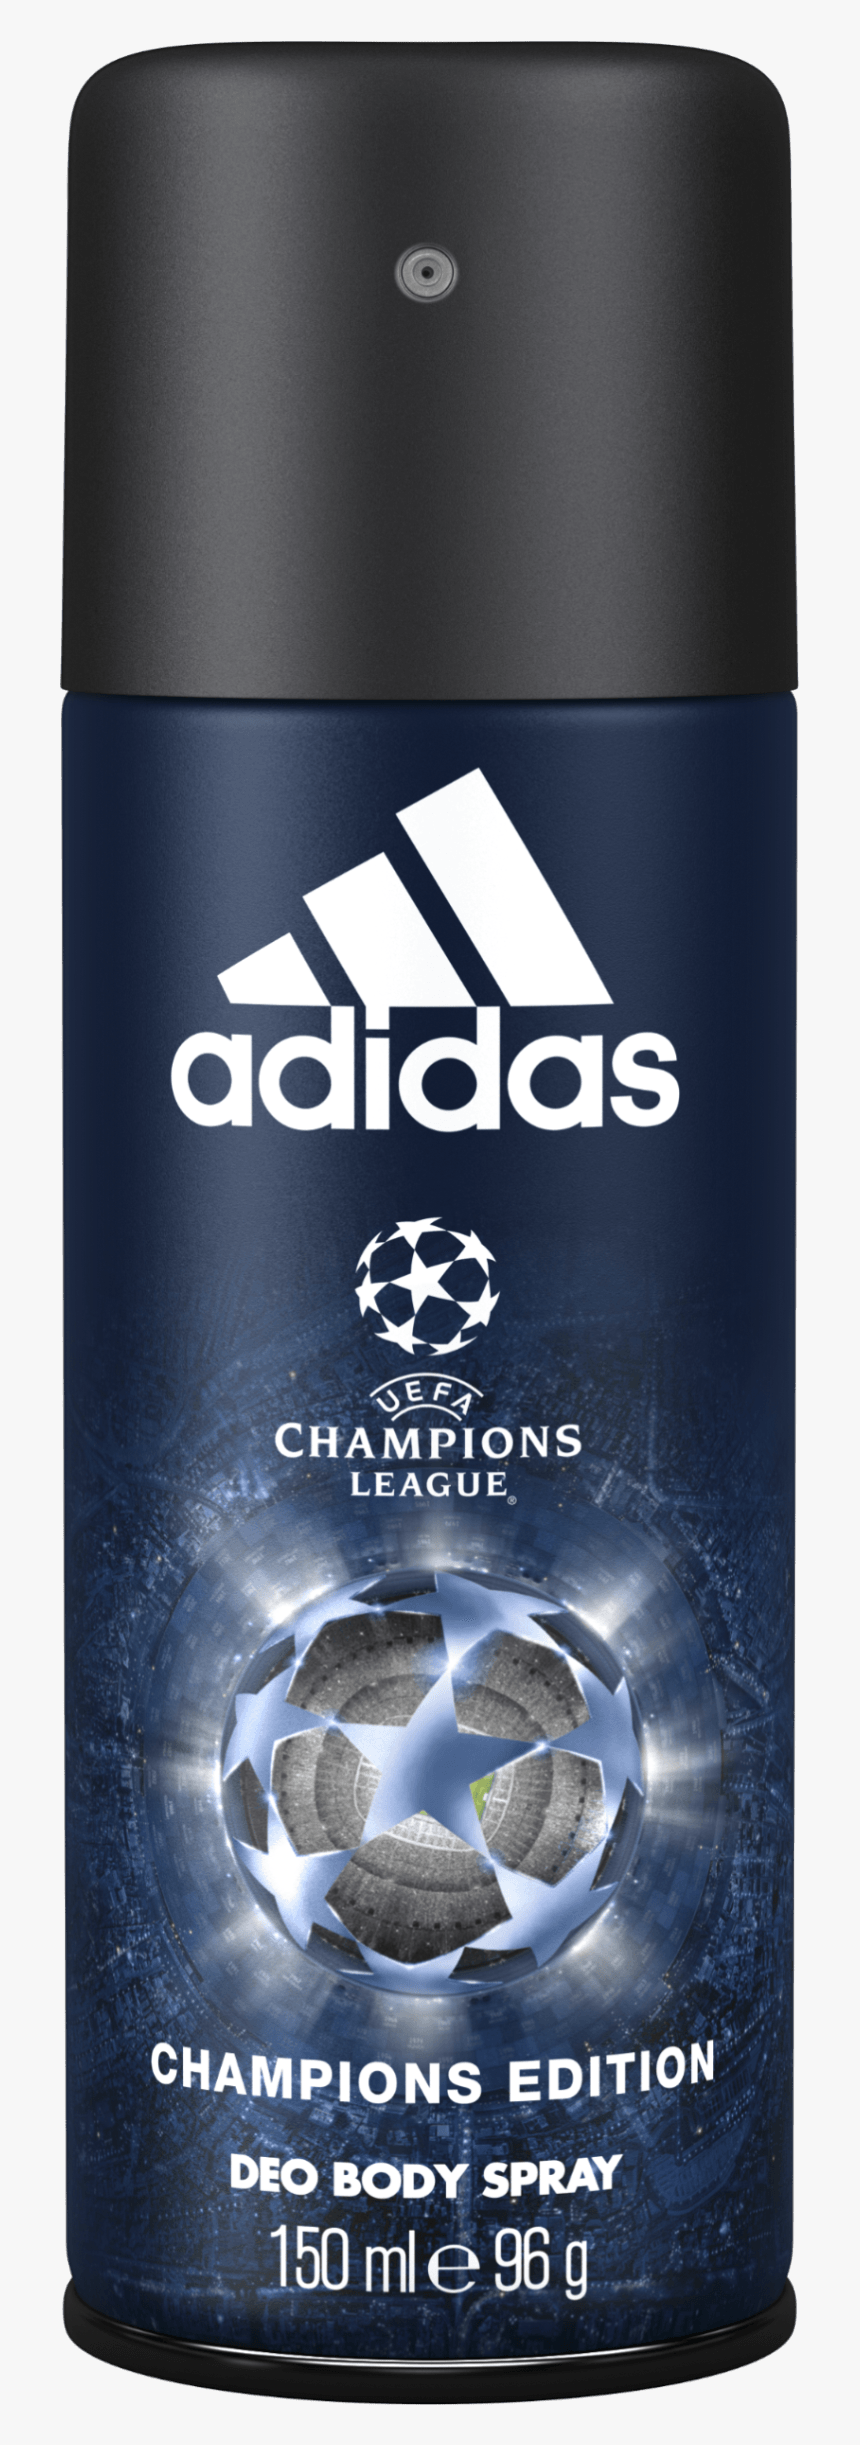 Uefa Champions League Champions Edition Deodorant Body - Adidas Champions League Body Spray, HD Png Download, Free Download